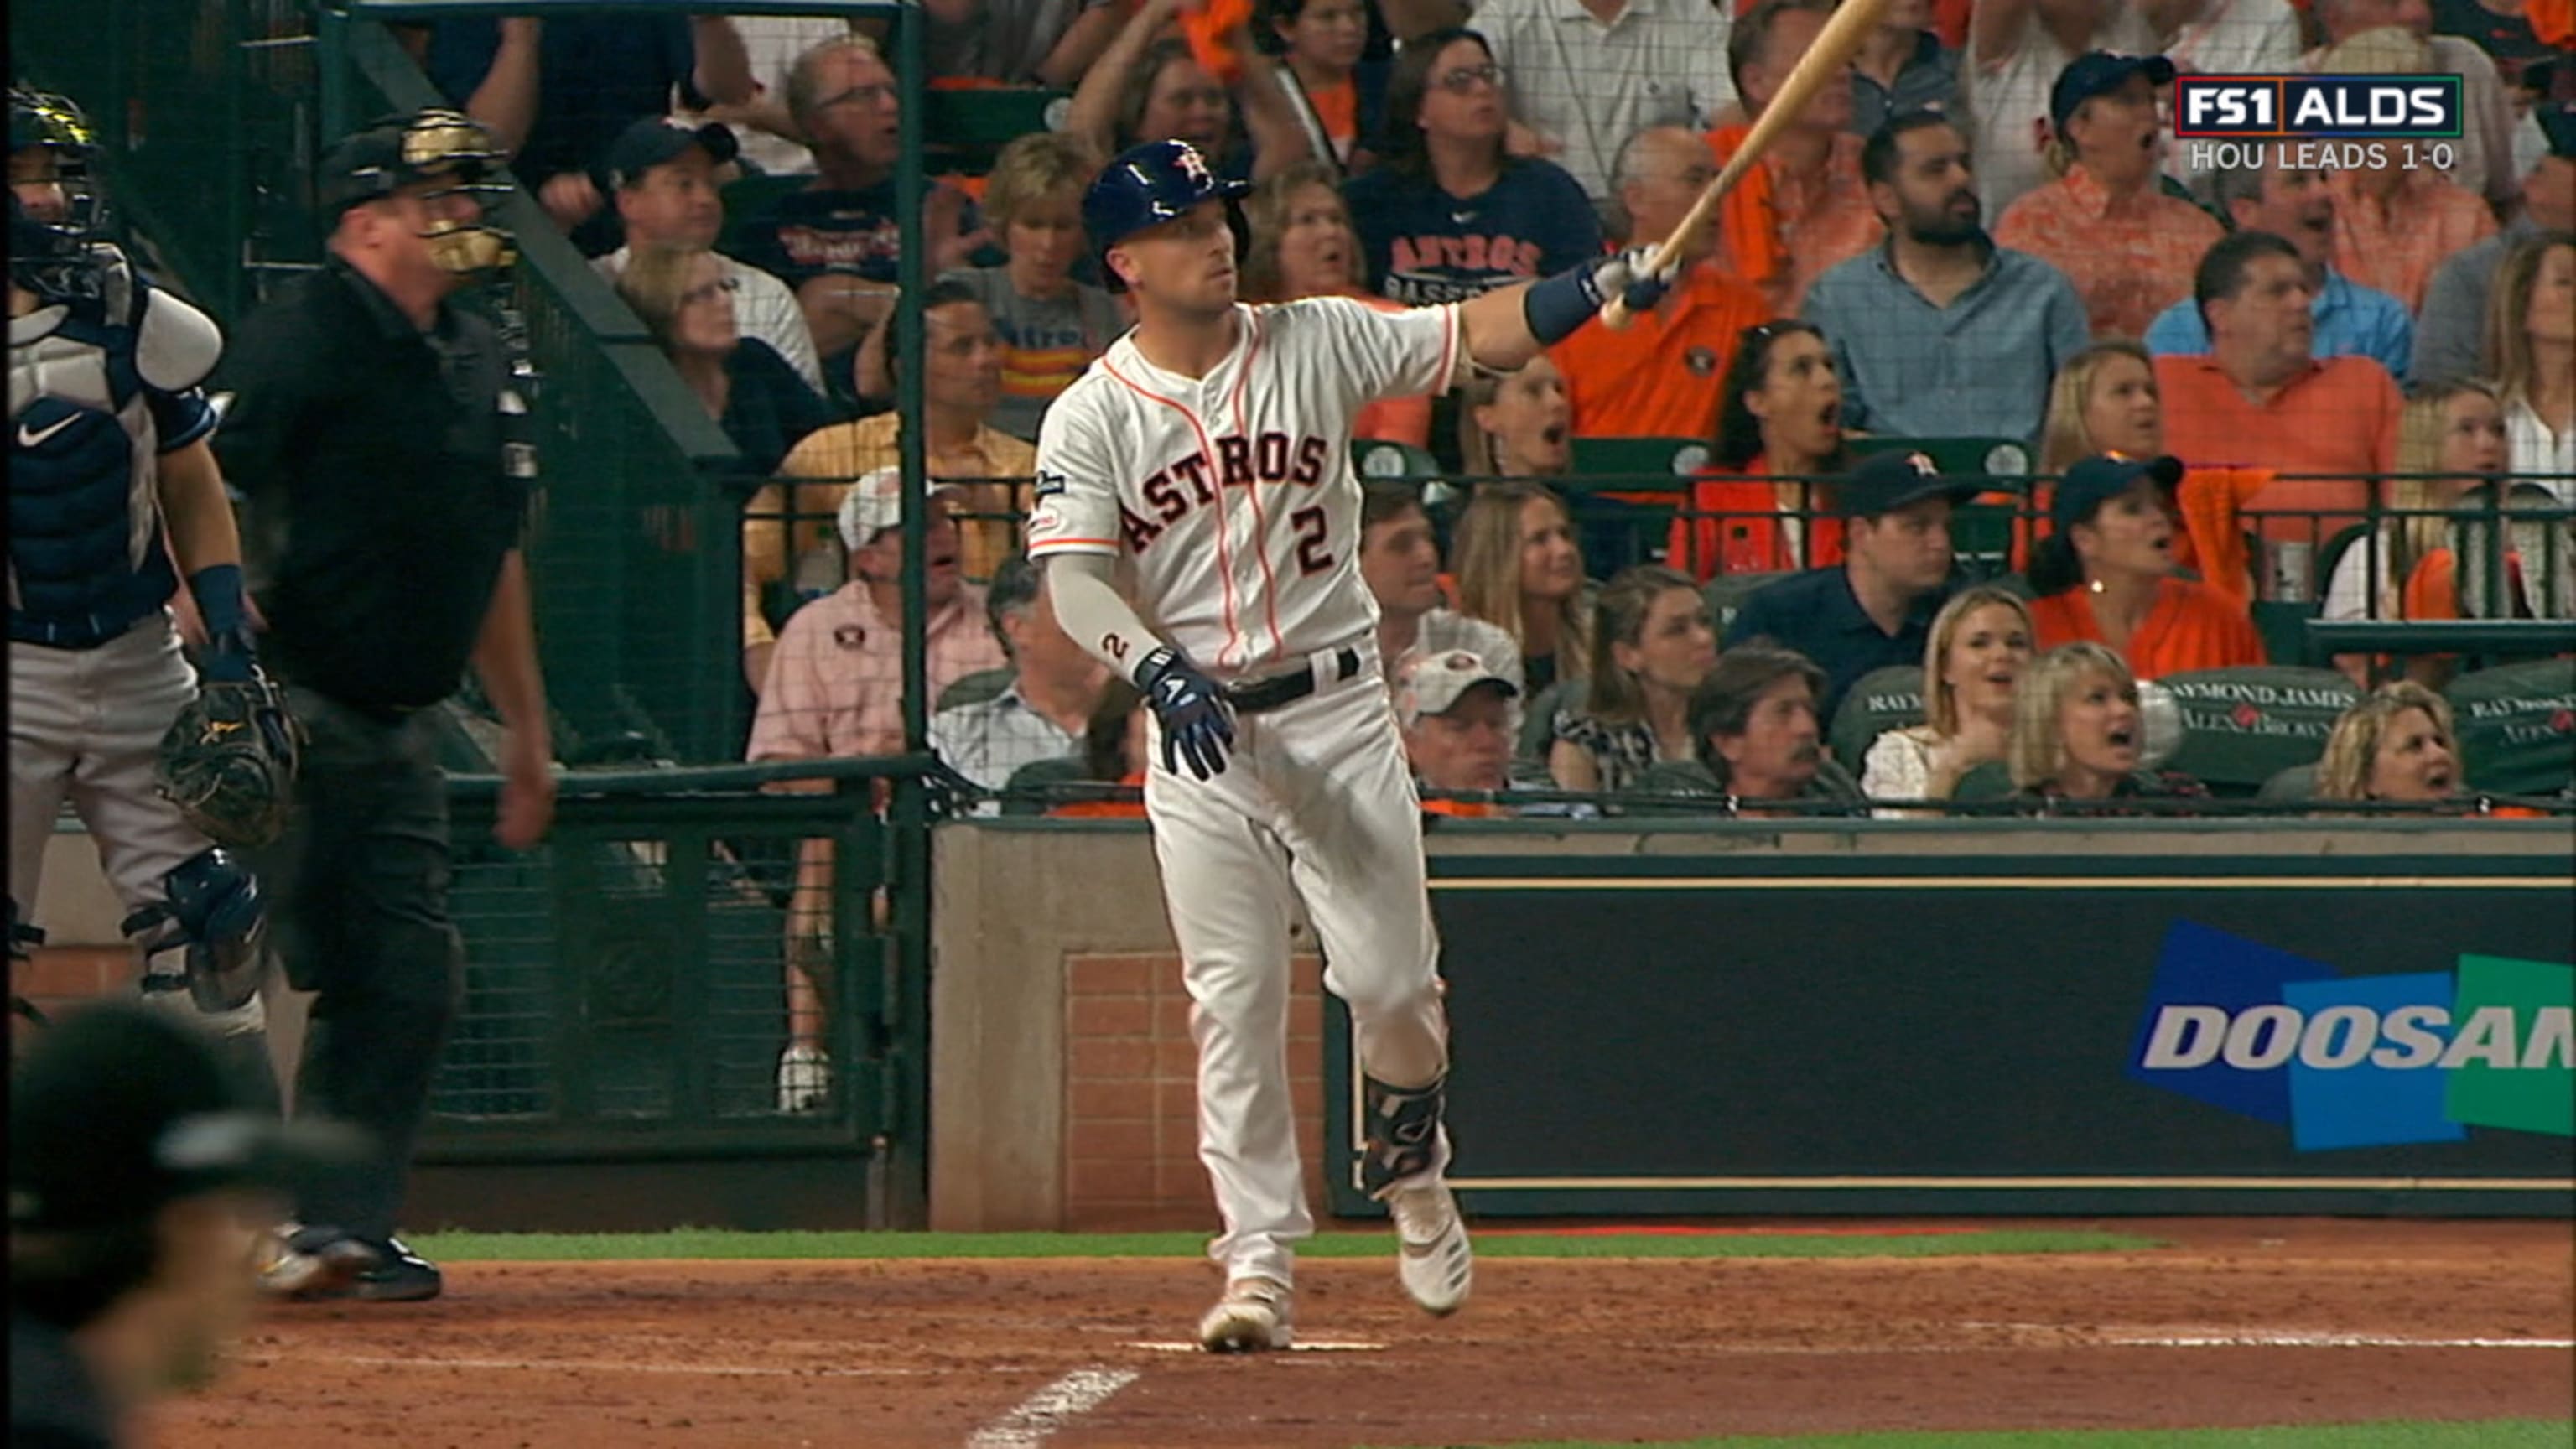 Houston Astros - Get to know the guys on the 40-man roster! 2019 AL Silver  Slugger and two-time All Star Alex Bregman is slugging at a .706 clip in  Spring Training. He